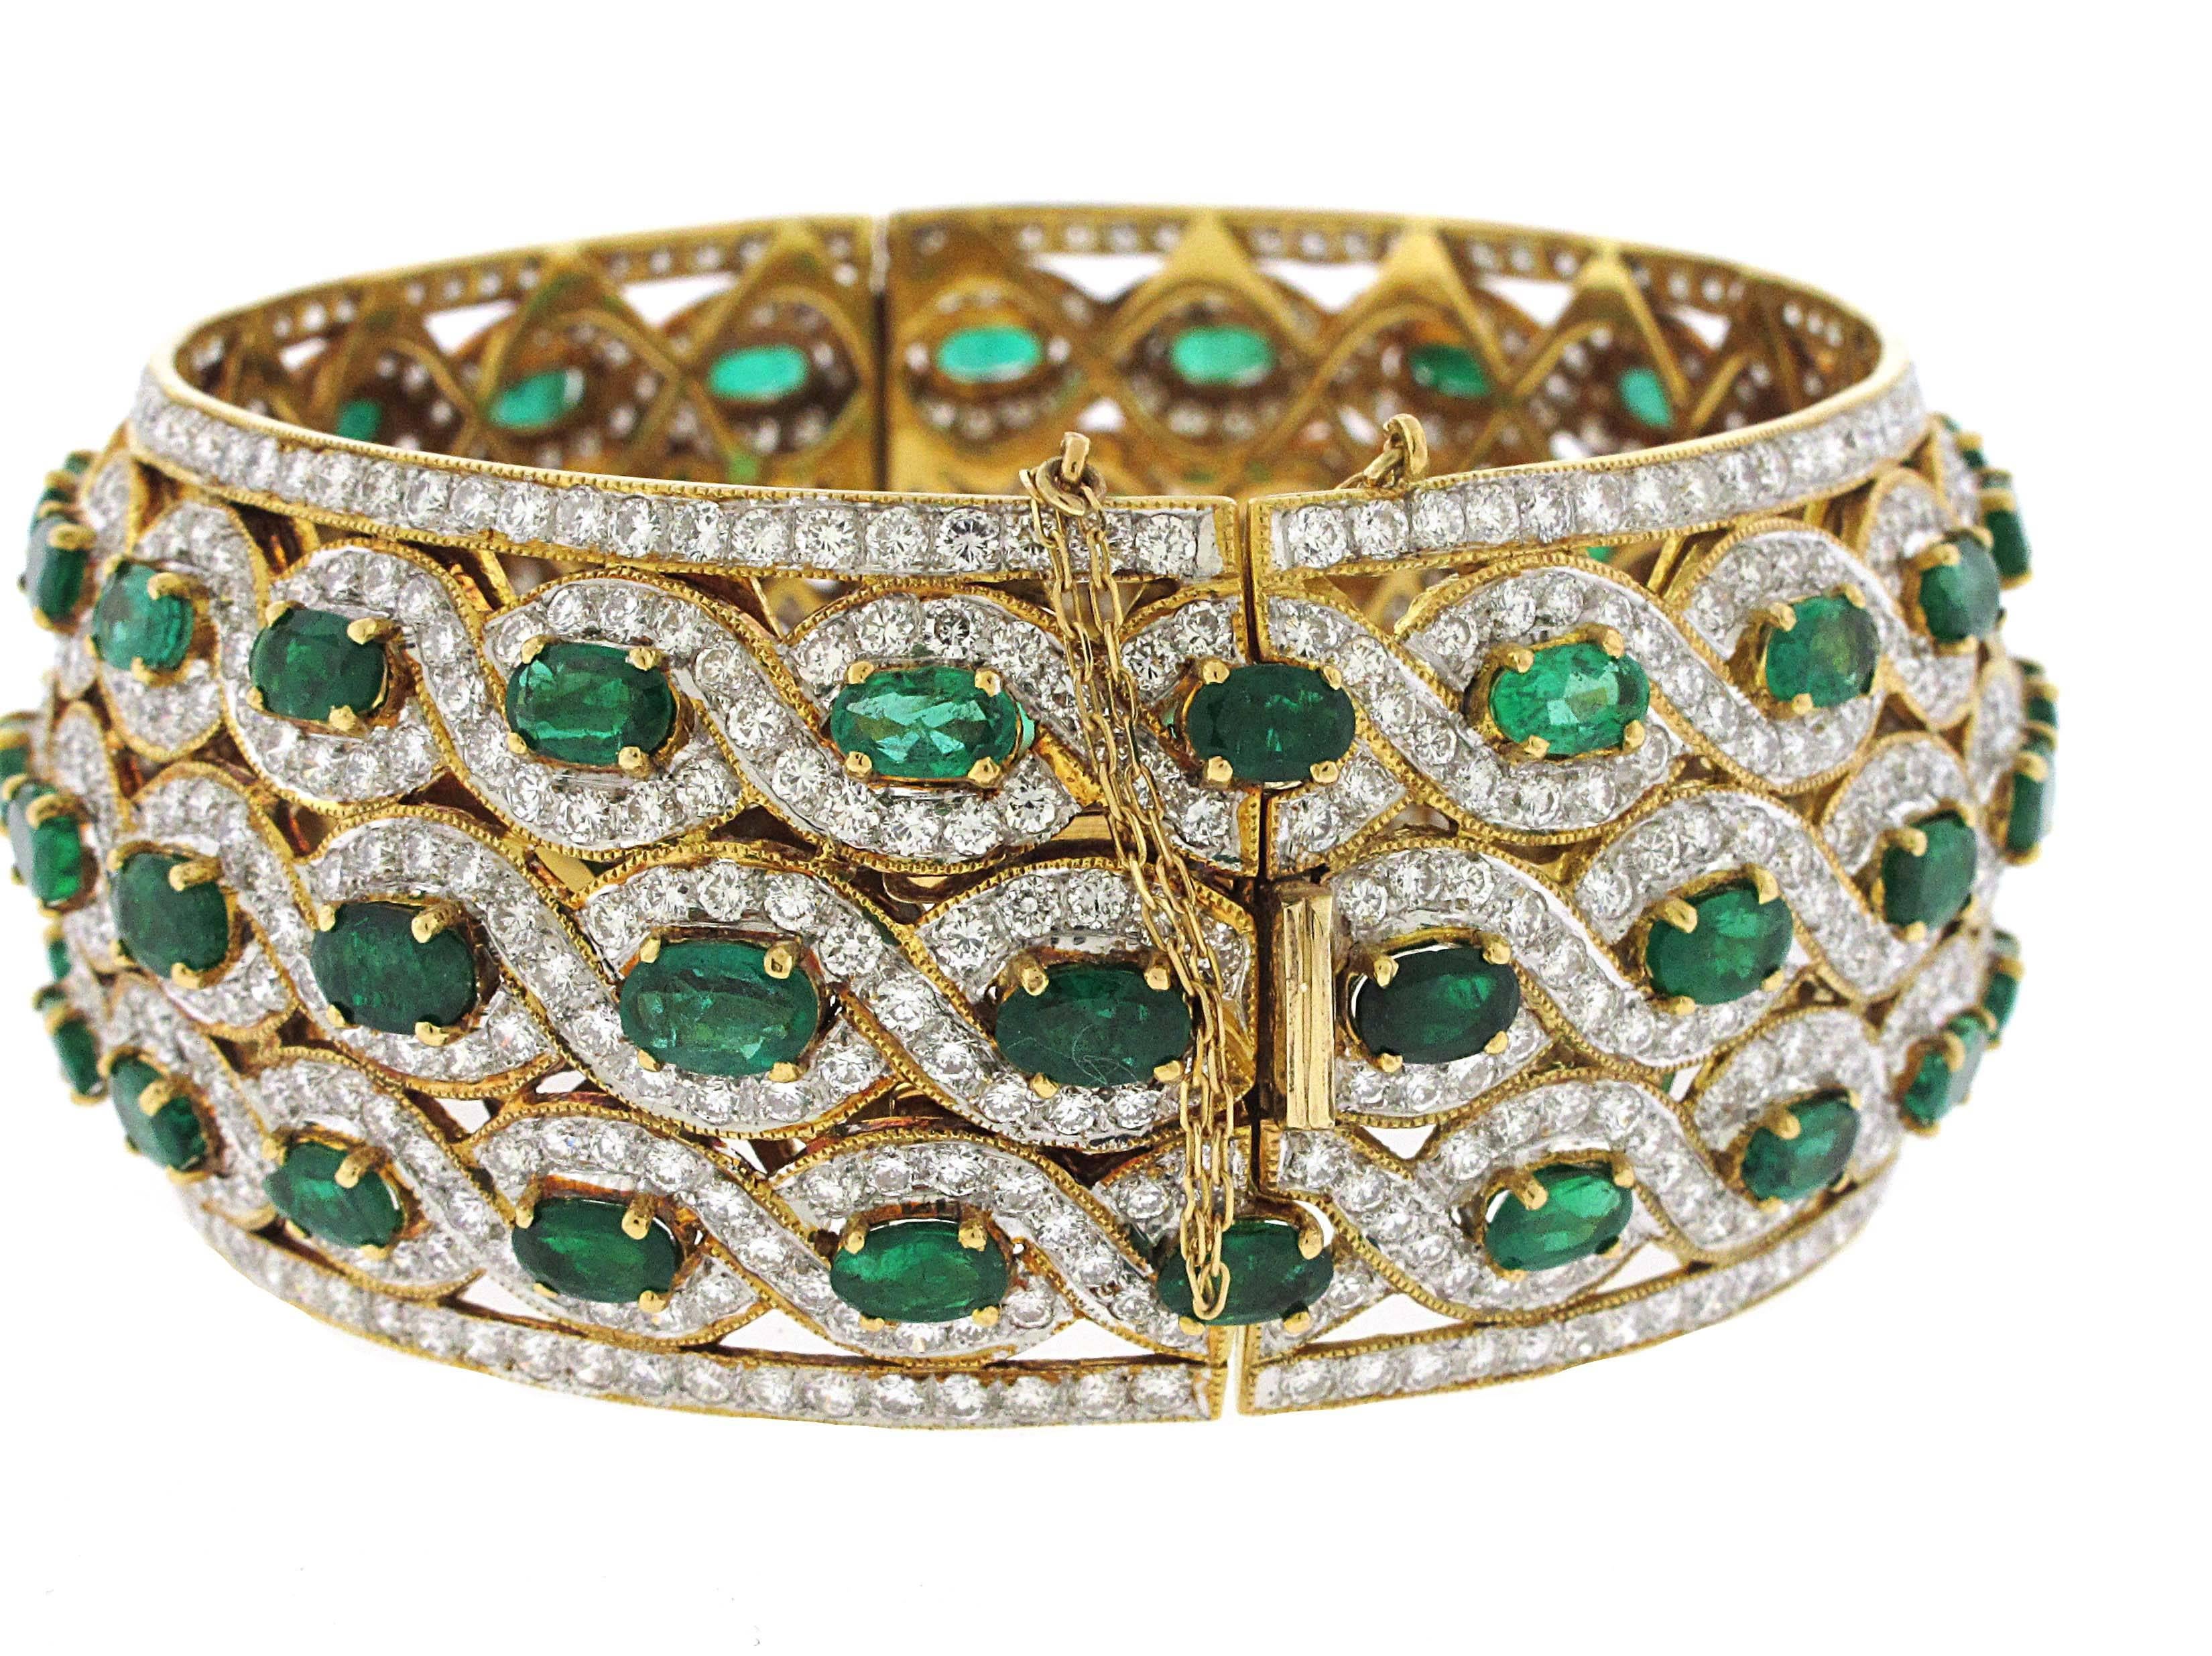 Gorgeous one of a kind emerald and diamond bangle. We approximate 15.50 carats of green emeralds and over 14 carats of white diamonds. This is set in 20kt yellow gold, not 14kt or 18kt making it an extremely well made bangle bracelet. Will fit a